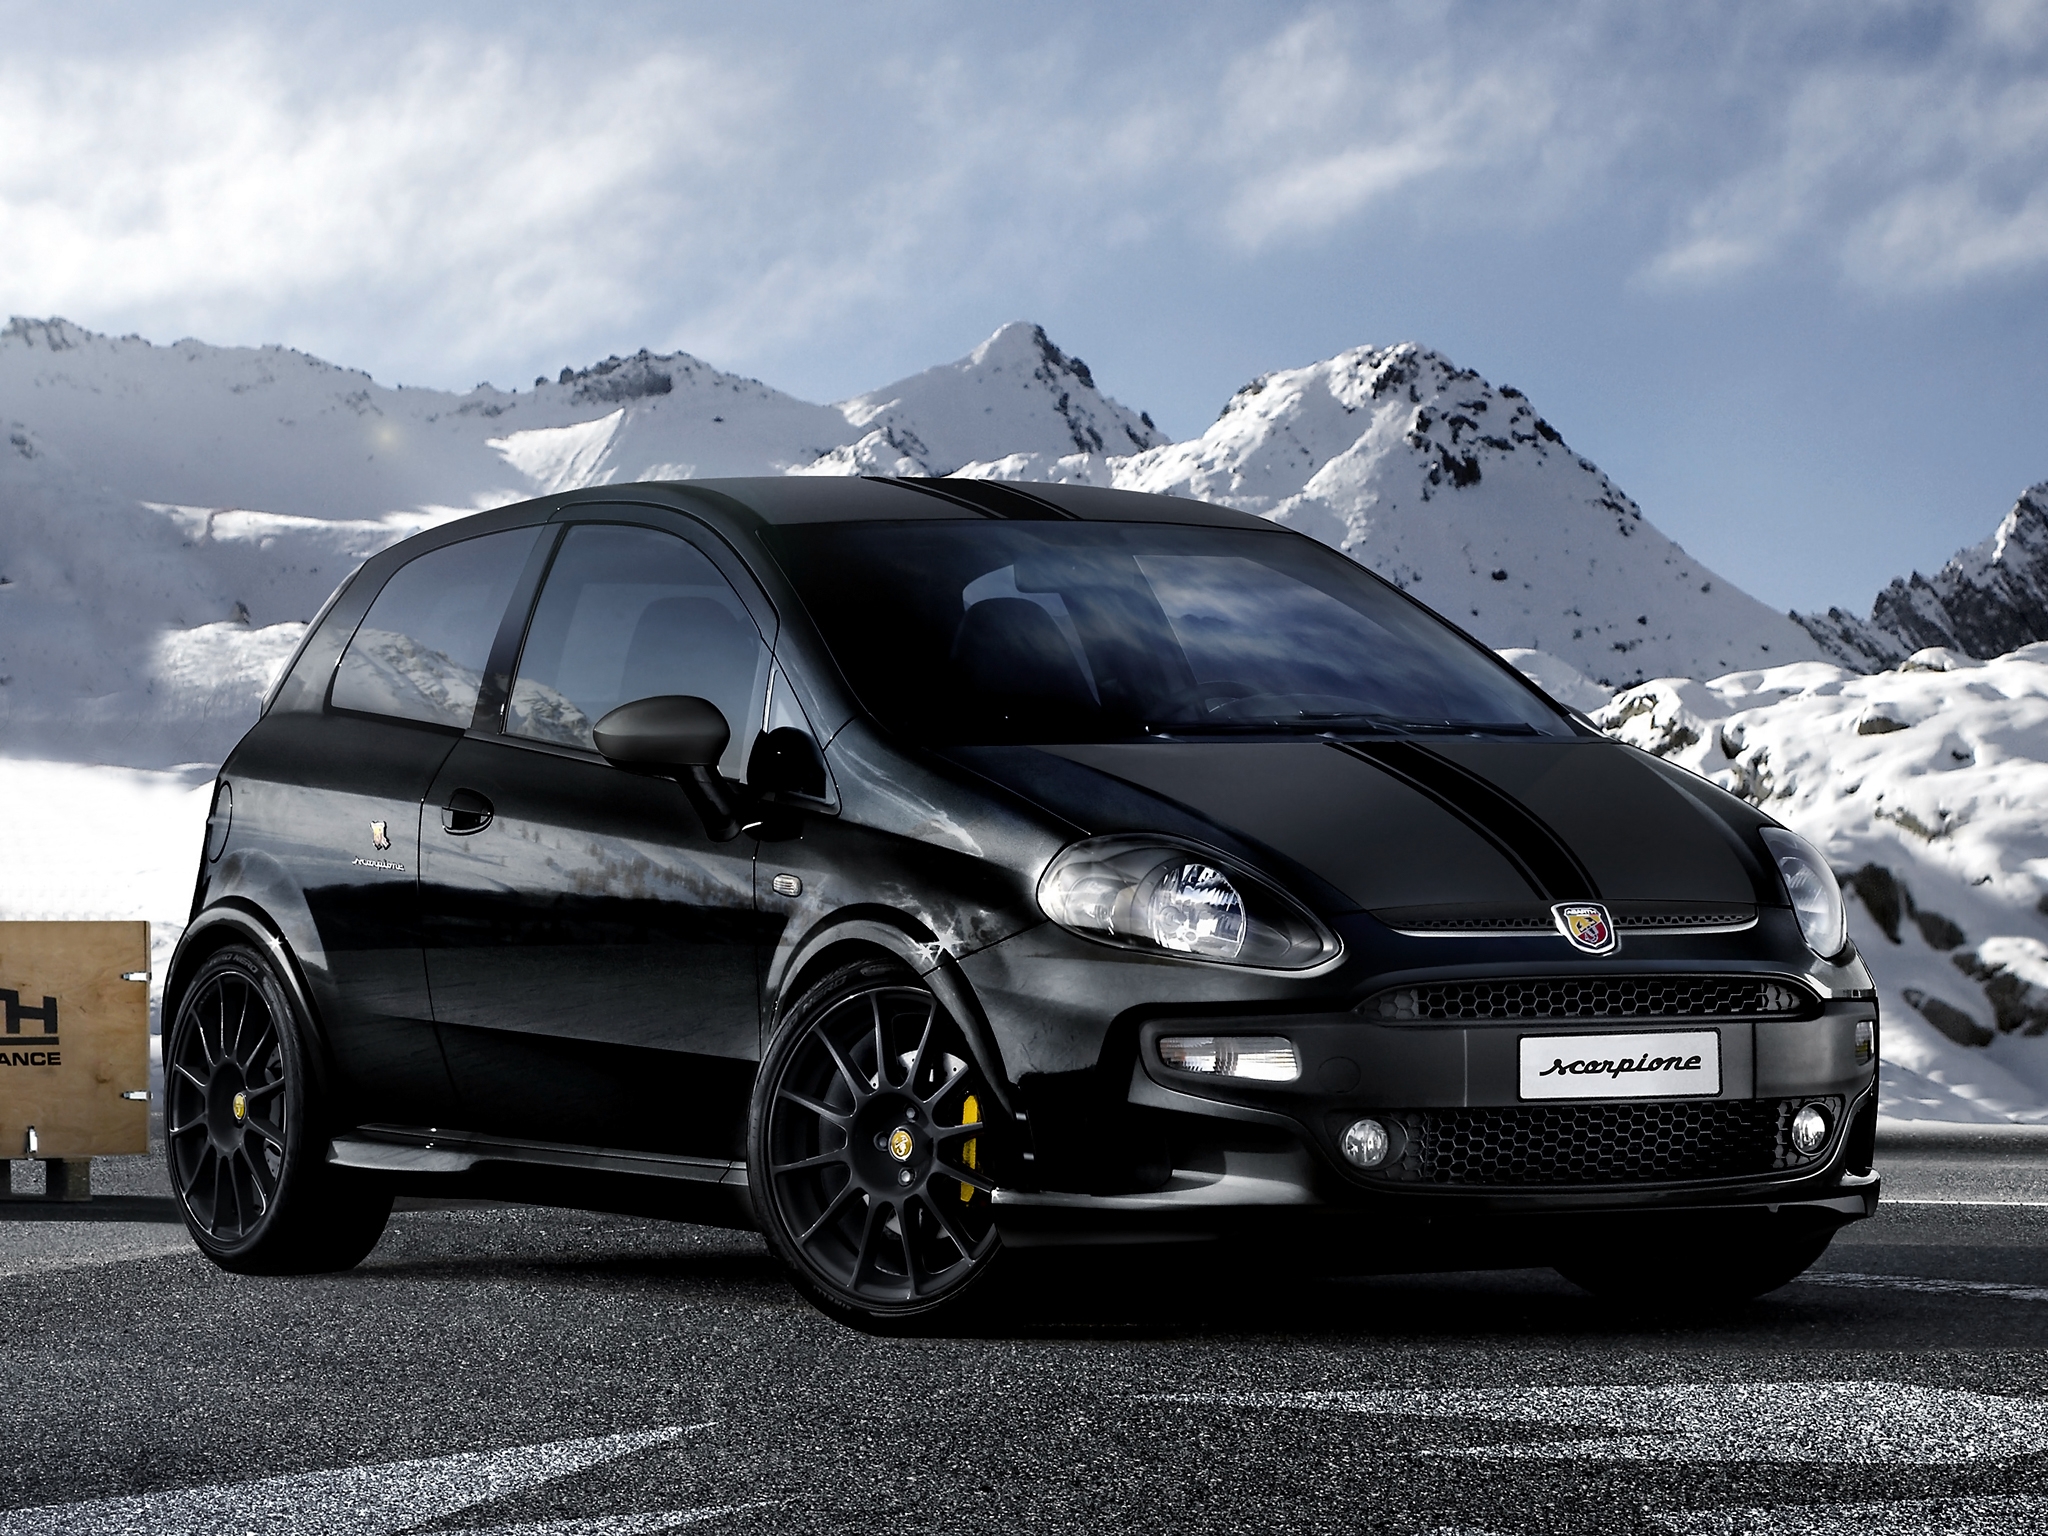 vertical wallpaper black, auto, mountains, cars, side view, stylish, abarth, scorpione